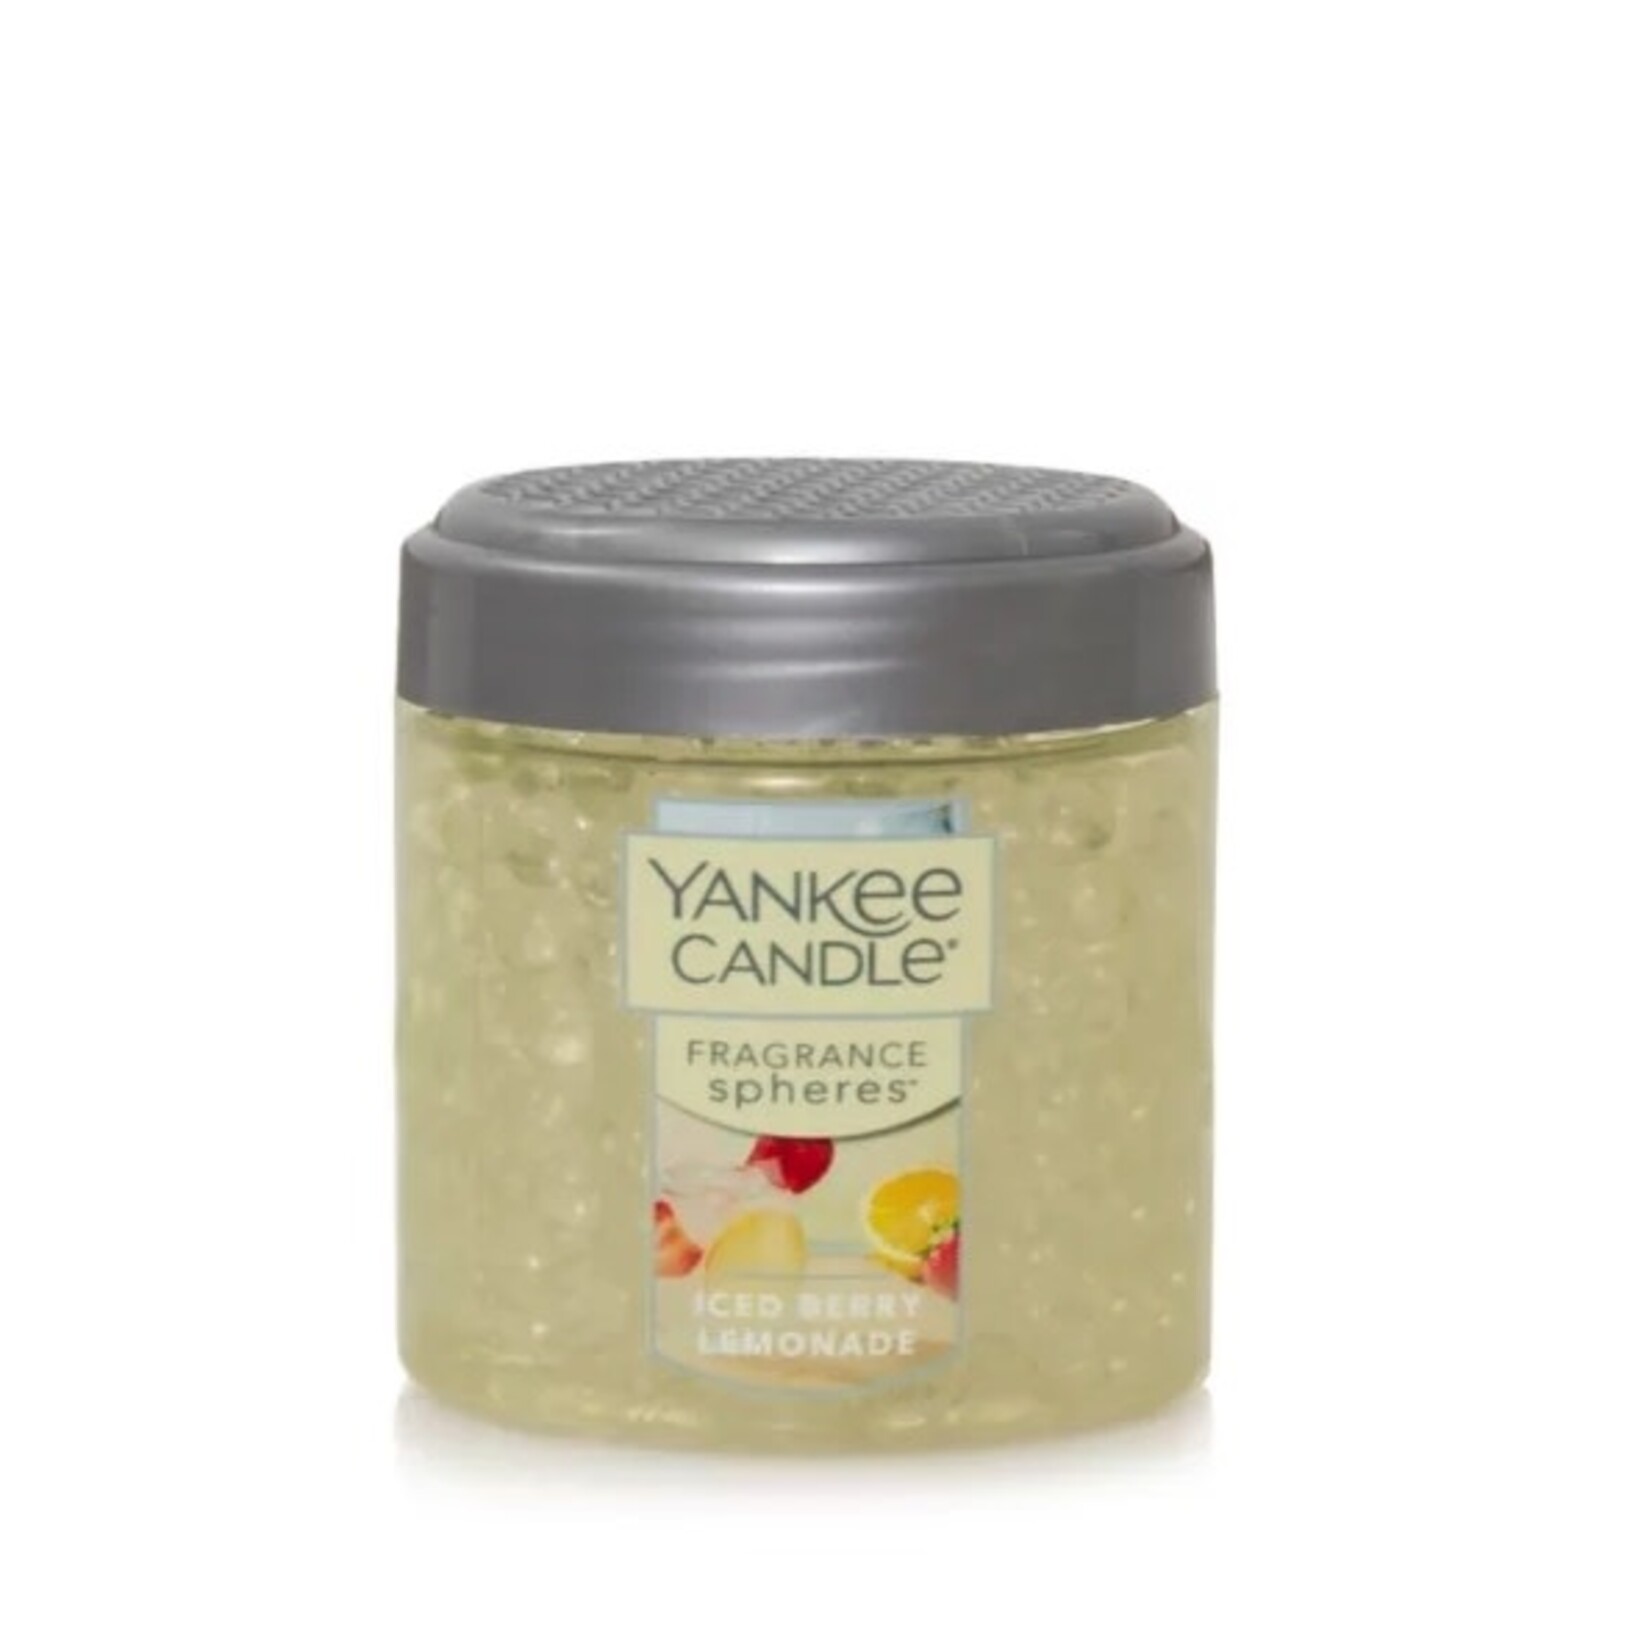 Yankee Candles Yankee Candle Fragrance Spheres Odor Neutralizing Iced Berry Lemonade Scent Beads